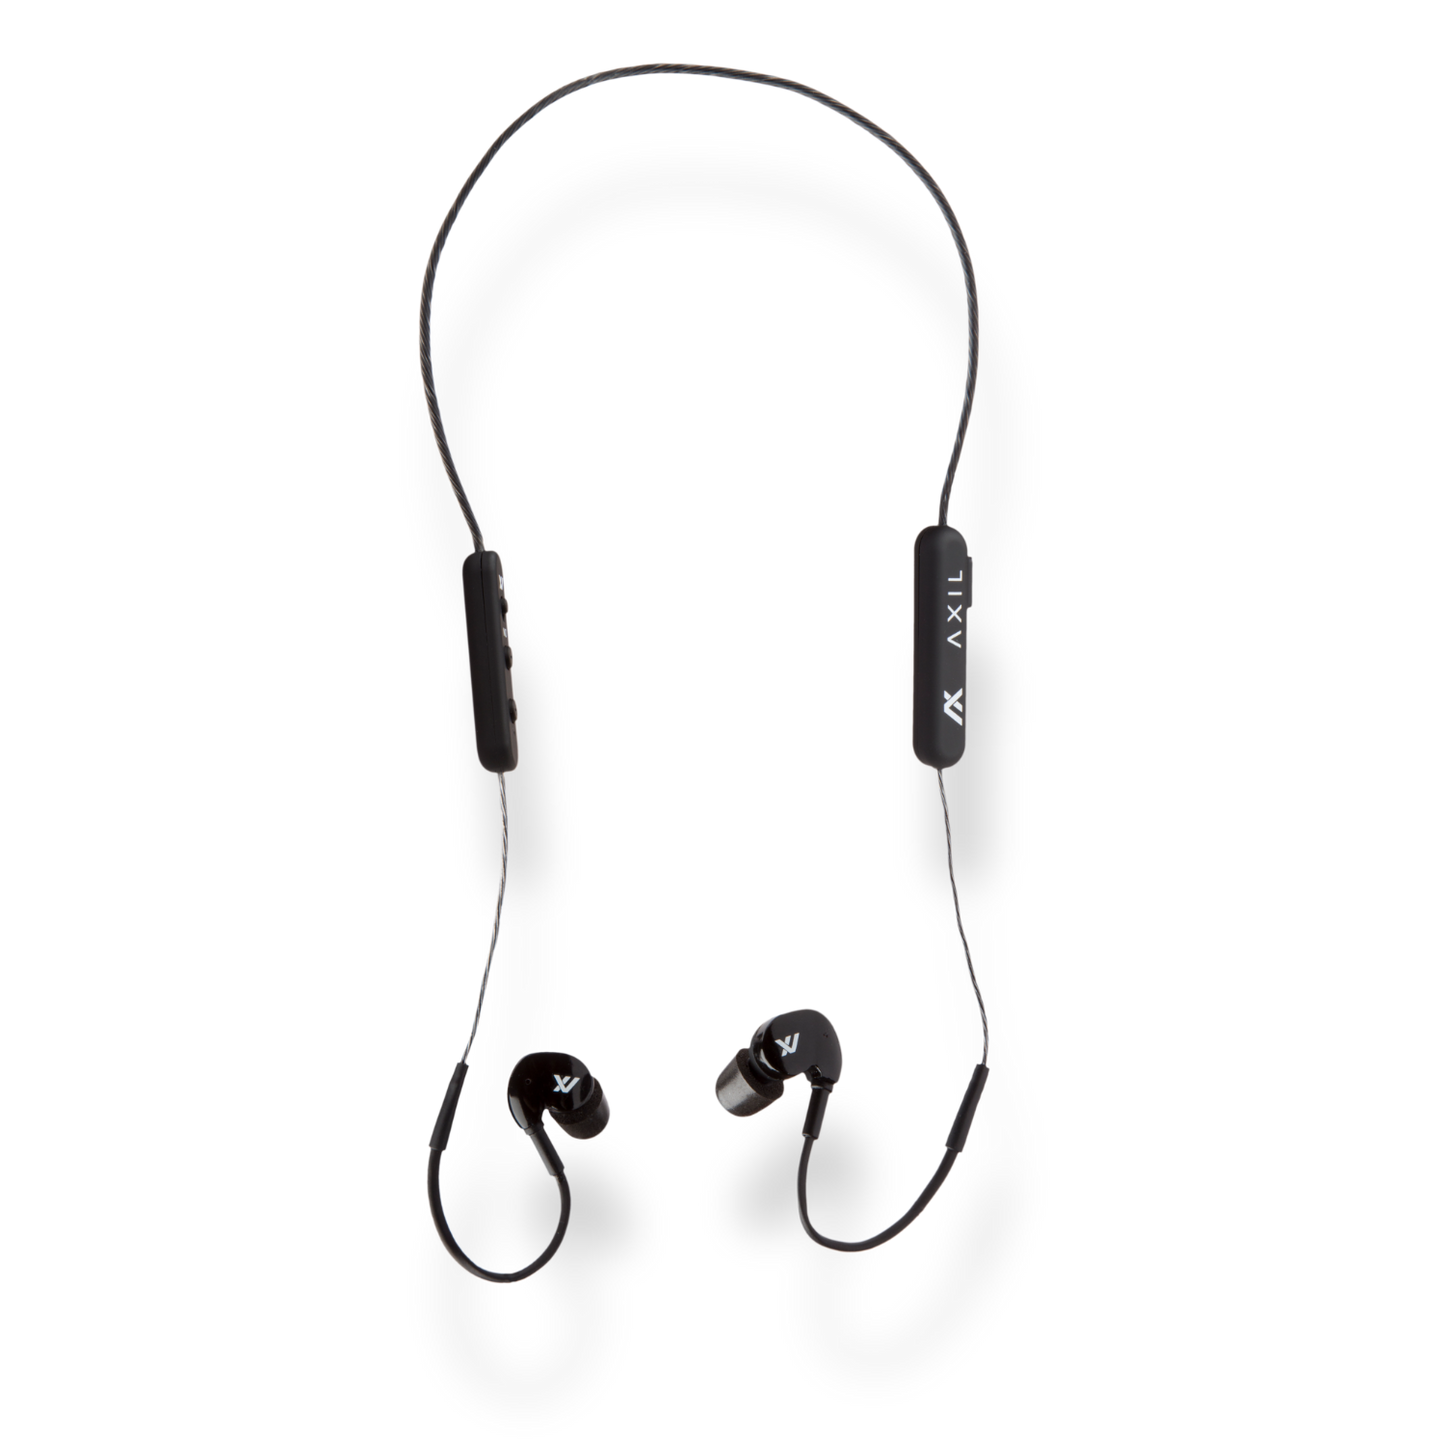 GS Extreme 2.0 Hearing Enhancement & Protection